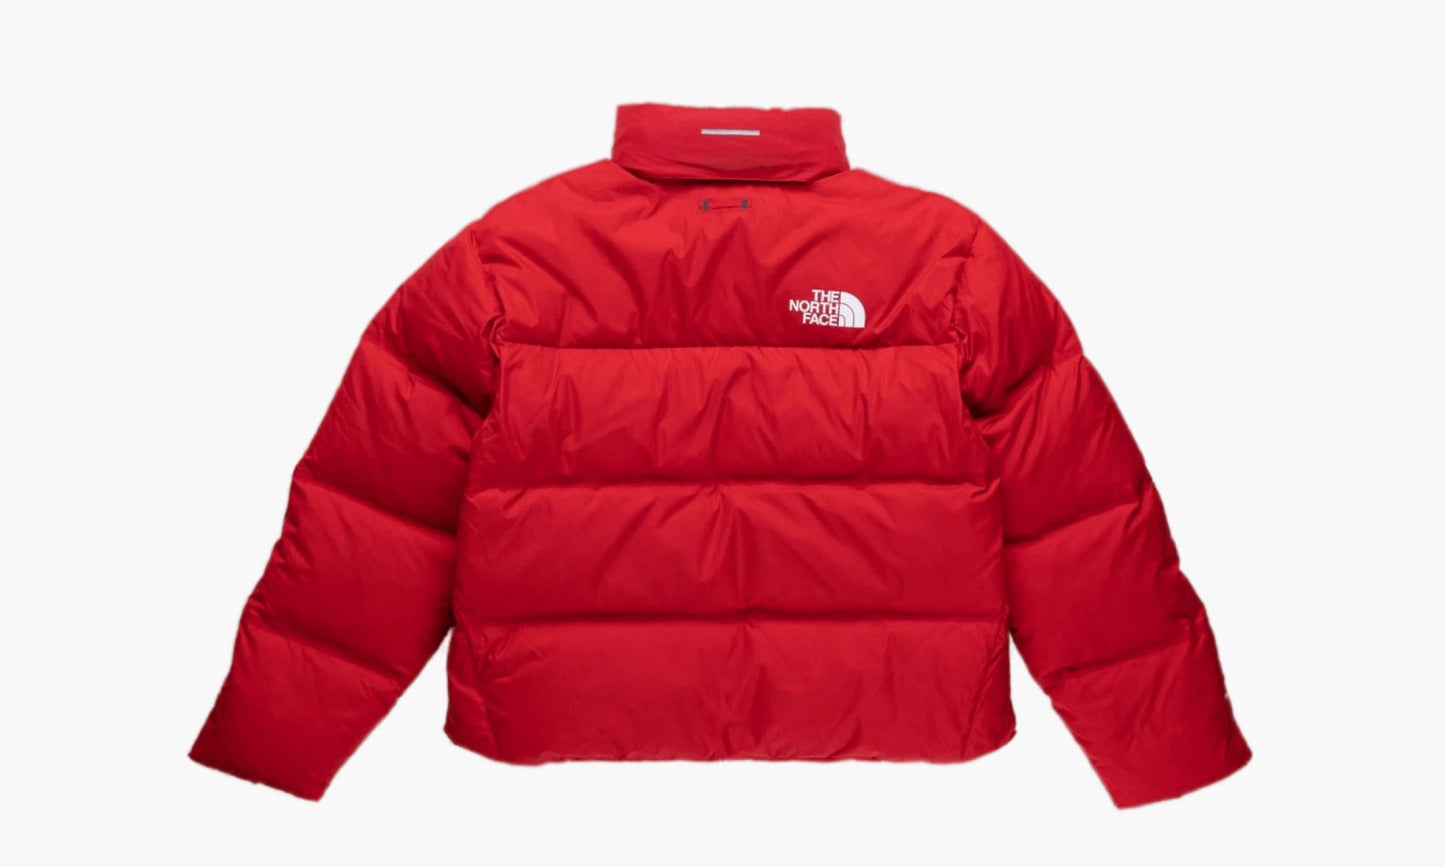 The North Face RMST Nuptse Jacket “Red” - NF0A7UQZ-682 | Grailshop